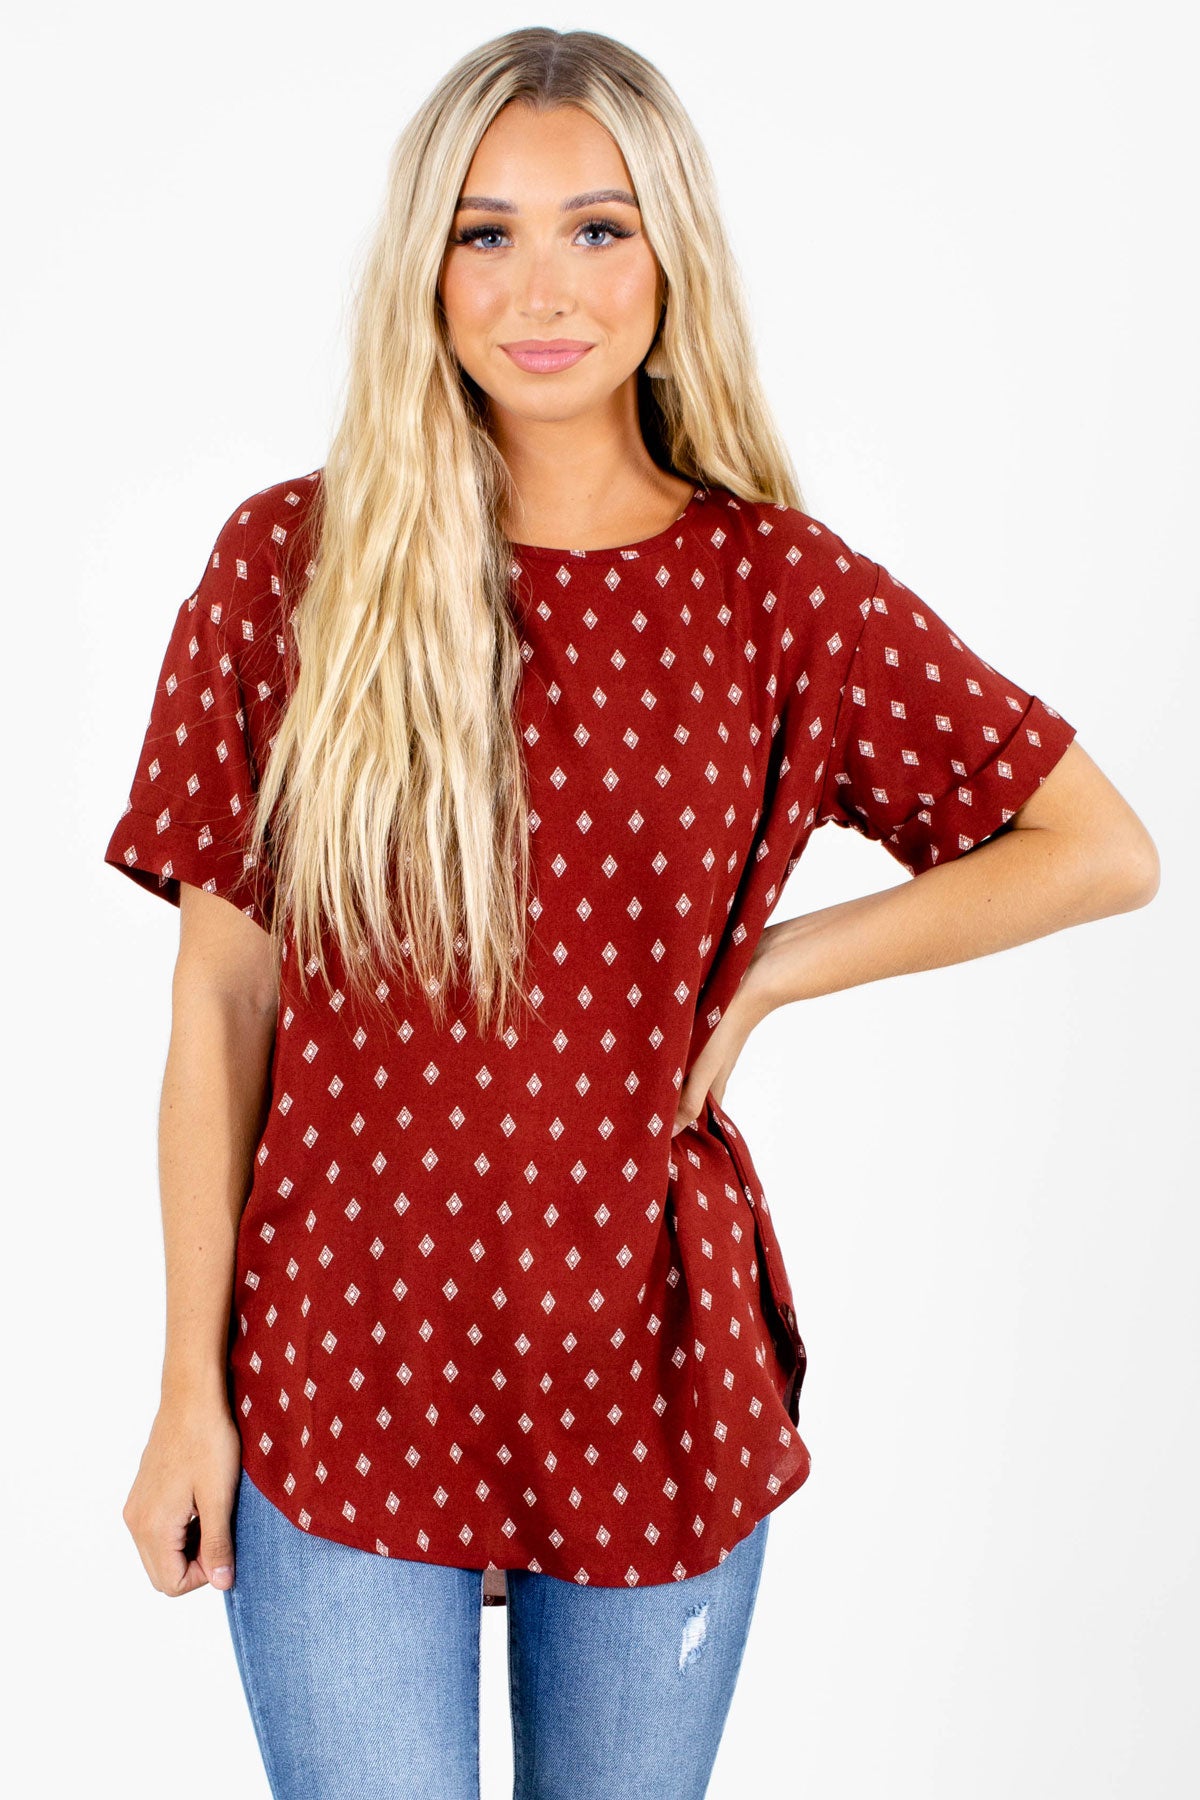 Rust Red Diamond Patterned Boutique Blouses for Women